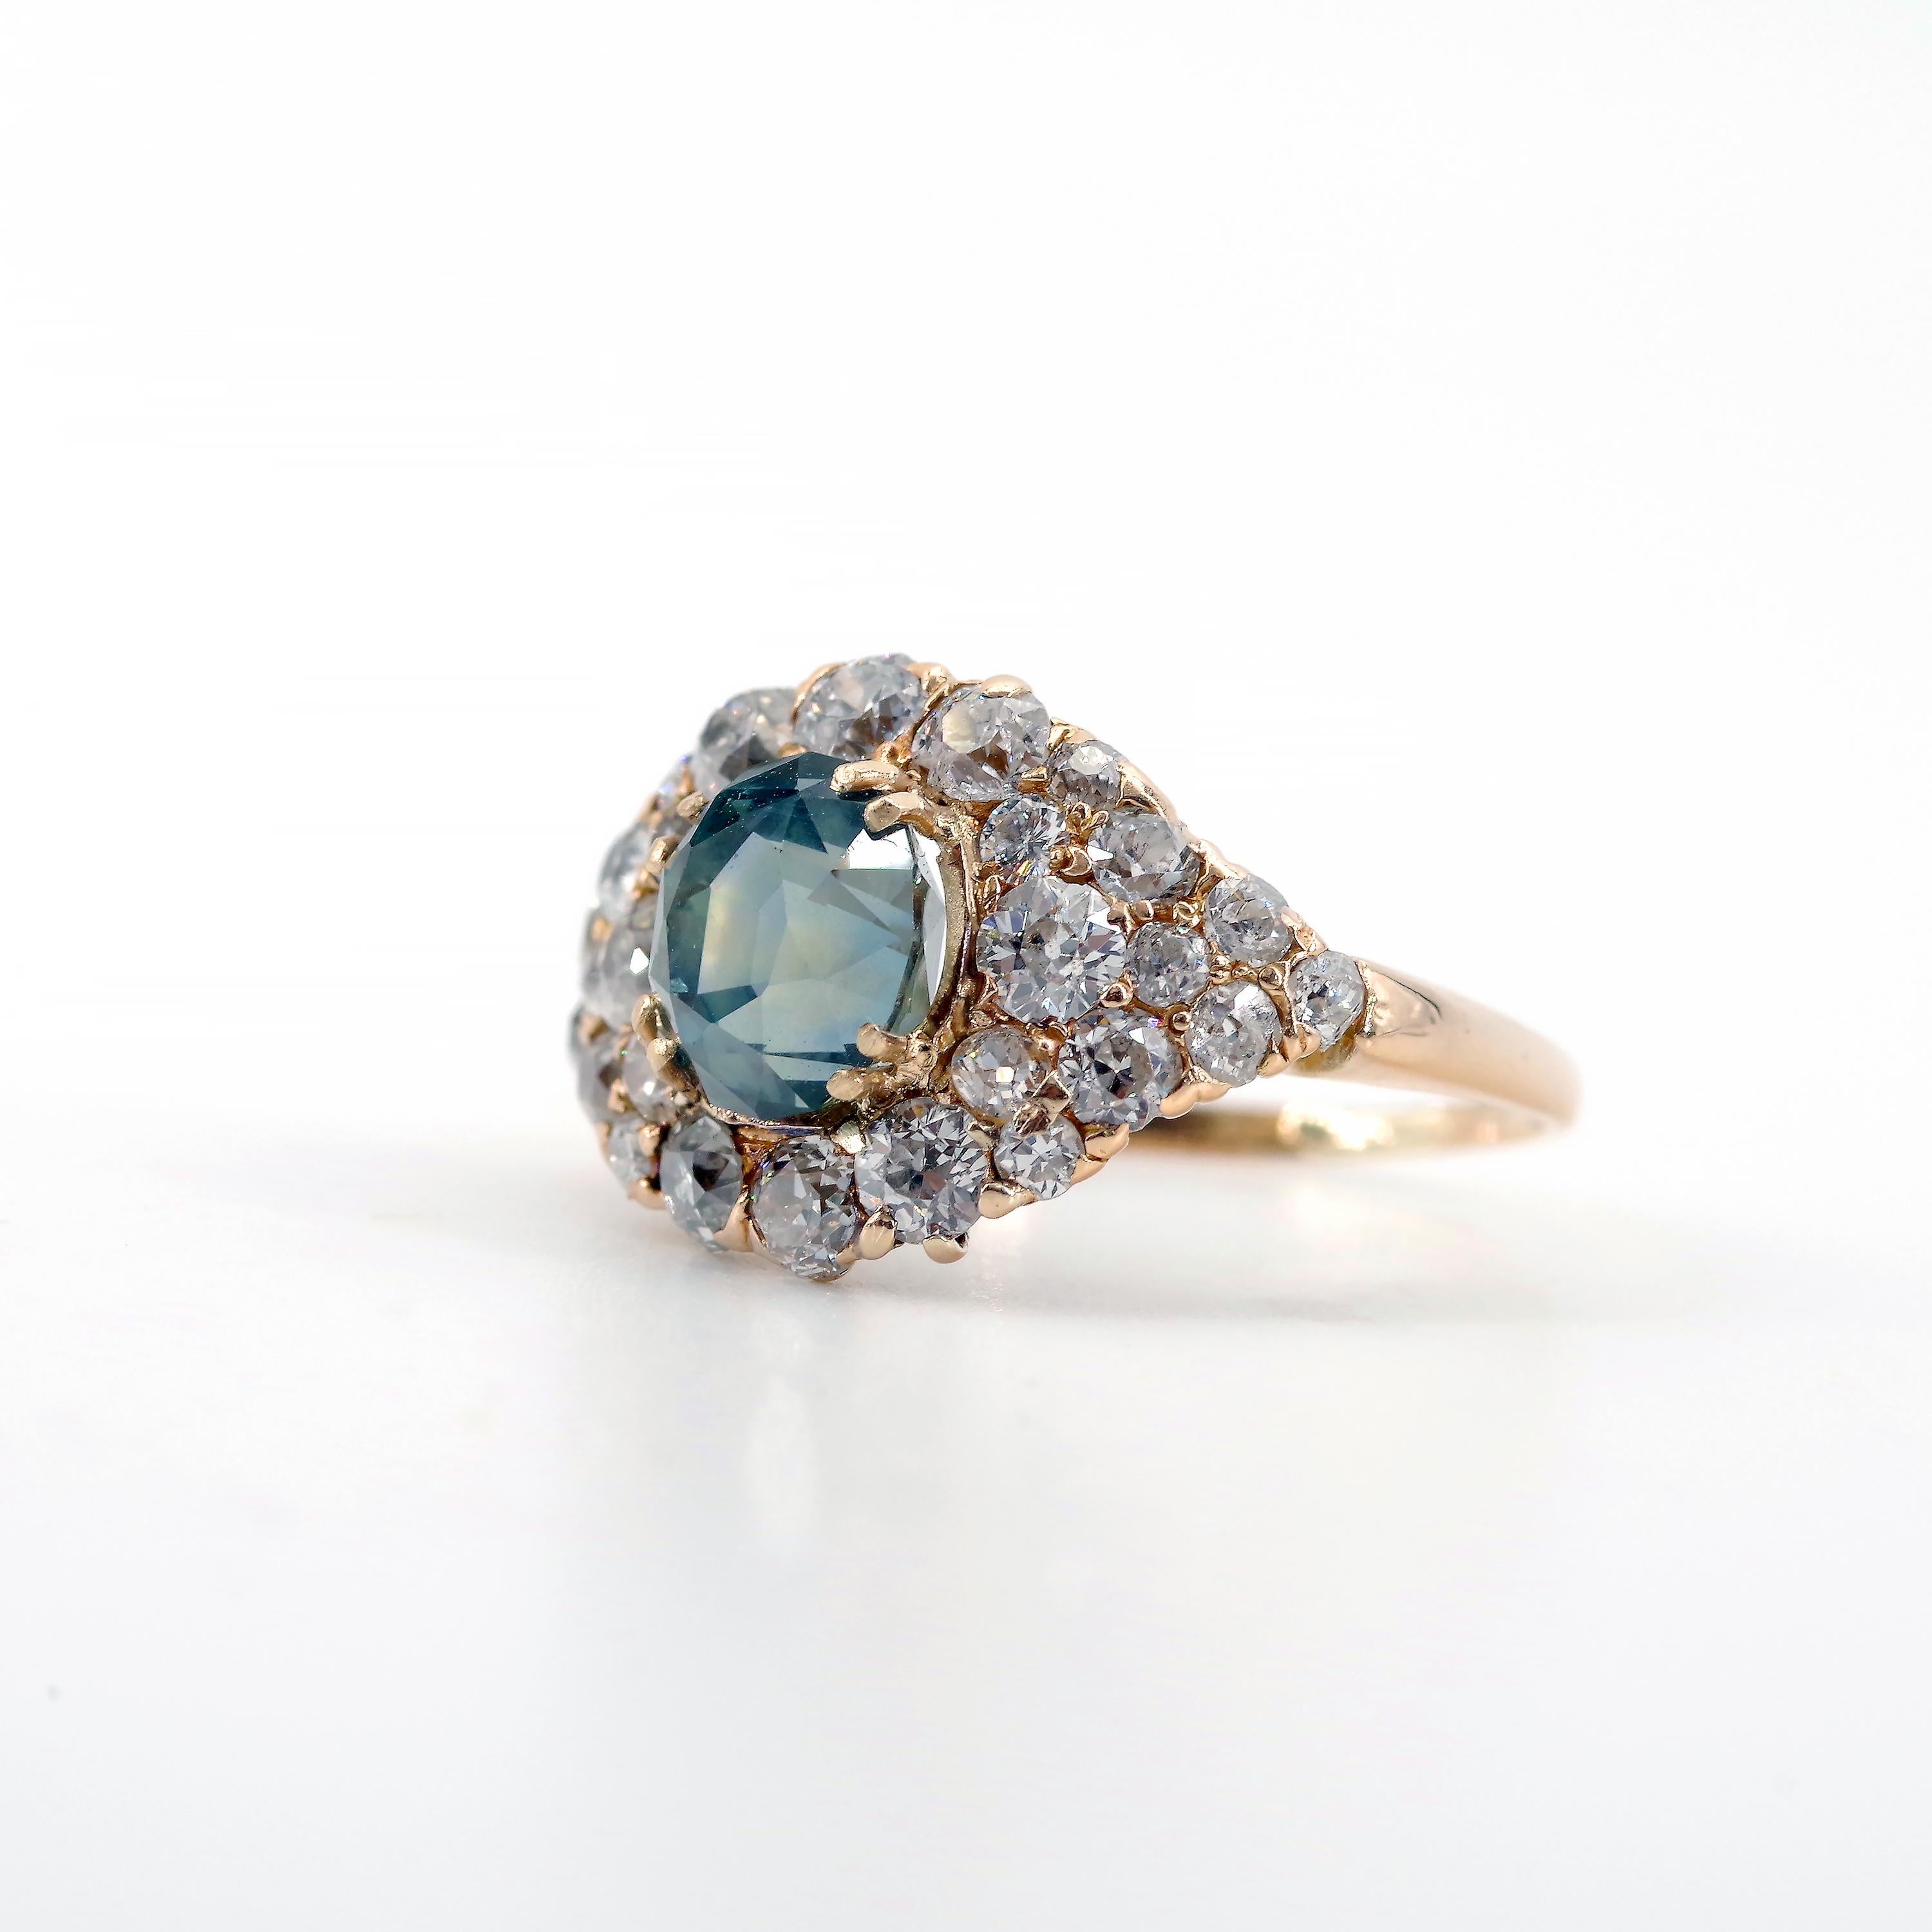 Think of the rich, royal blue of Kate Middleton's Ceylon sapphire engagement ring. To many people, that's the perfect—the only—color for a sapphire ring. This is *not* Kate Middleton's Ceylon sapphire engagement ring. This is a Victorian-era Montana